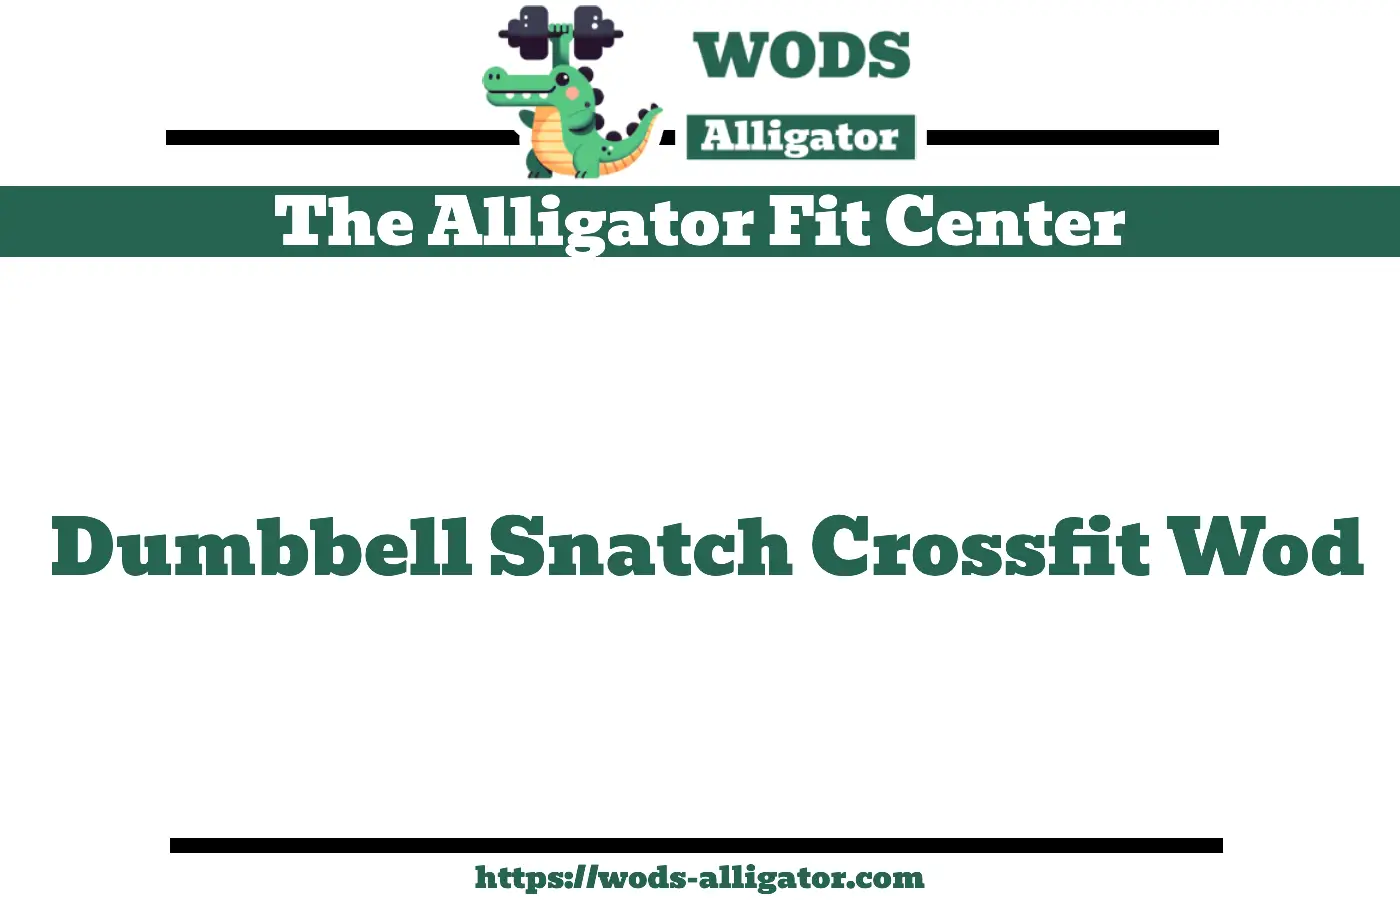 Dumbbell Snatch Crossfit Wod: Boost Your Crossfit Skills with These Intense Workouts